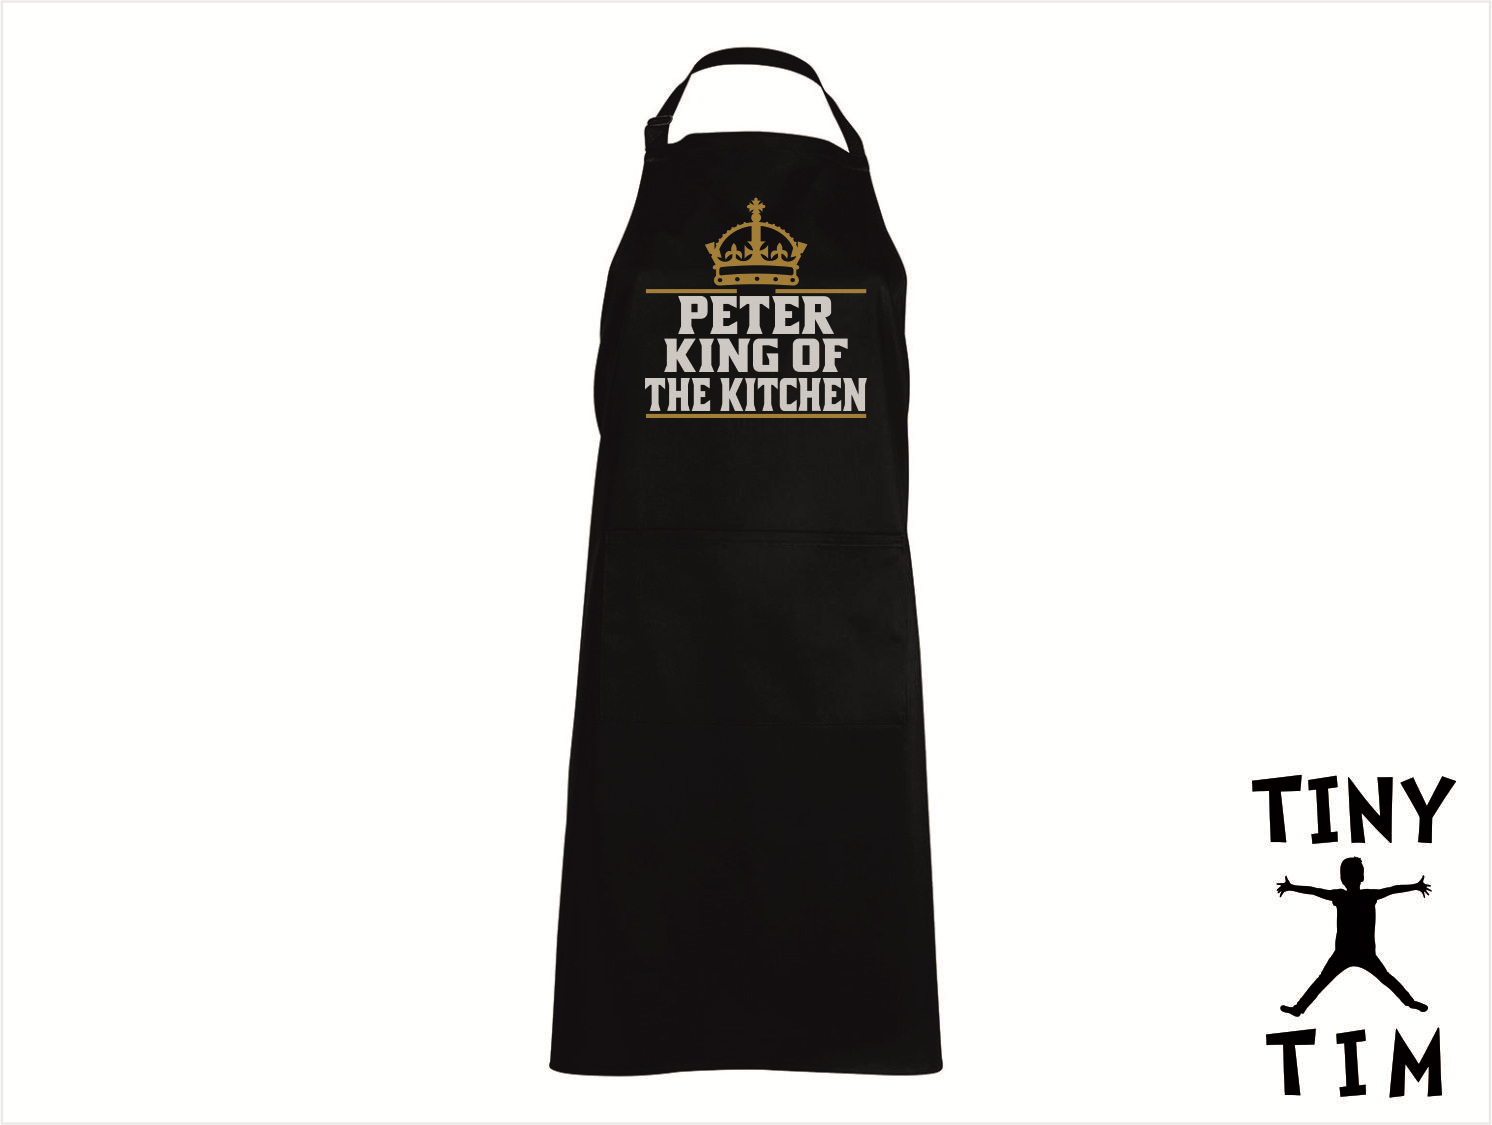 Named Custom Printed King Of The Kitchen Apron By Tiny Tim